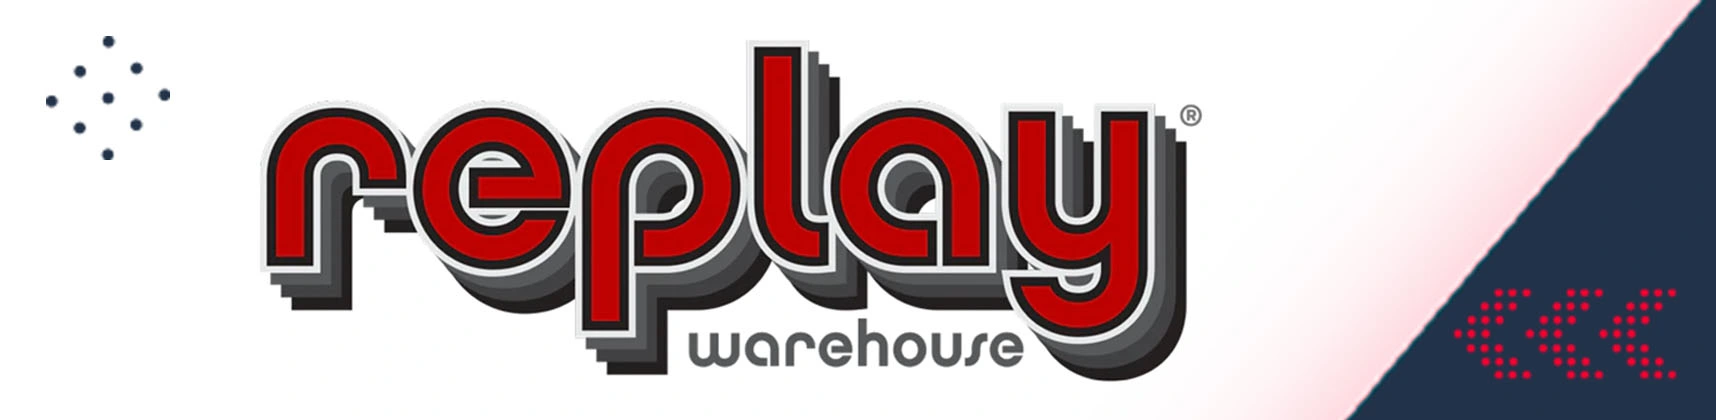 PlayBetter RePlay Warehouse for Open Box Golf GPS Laser Rangefinders at PlayBetter.com